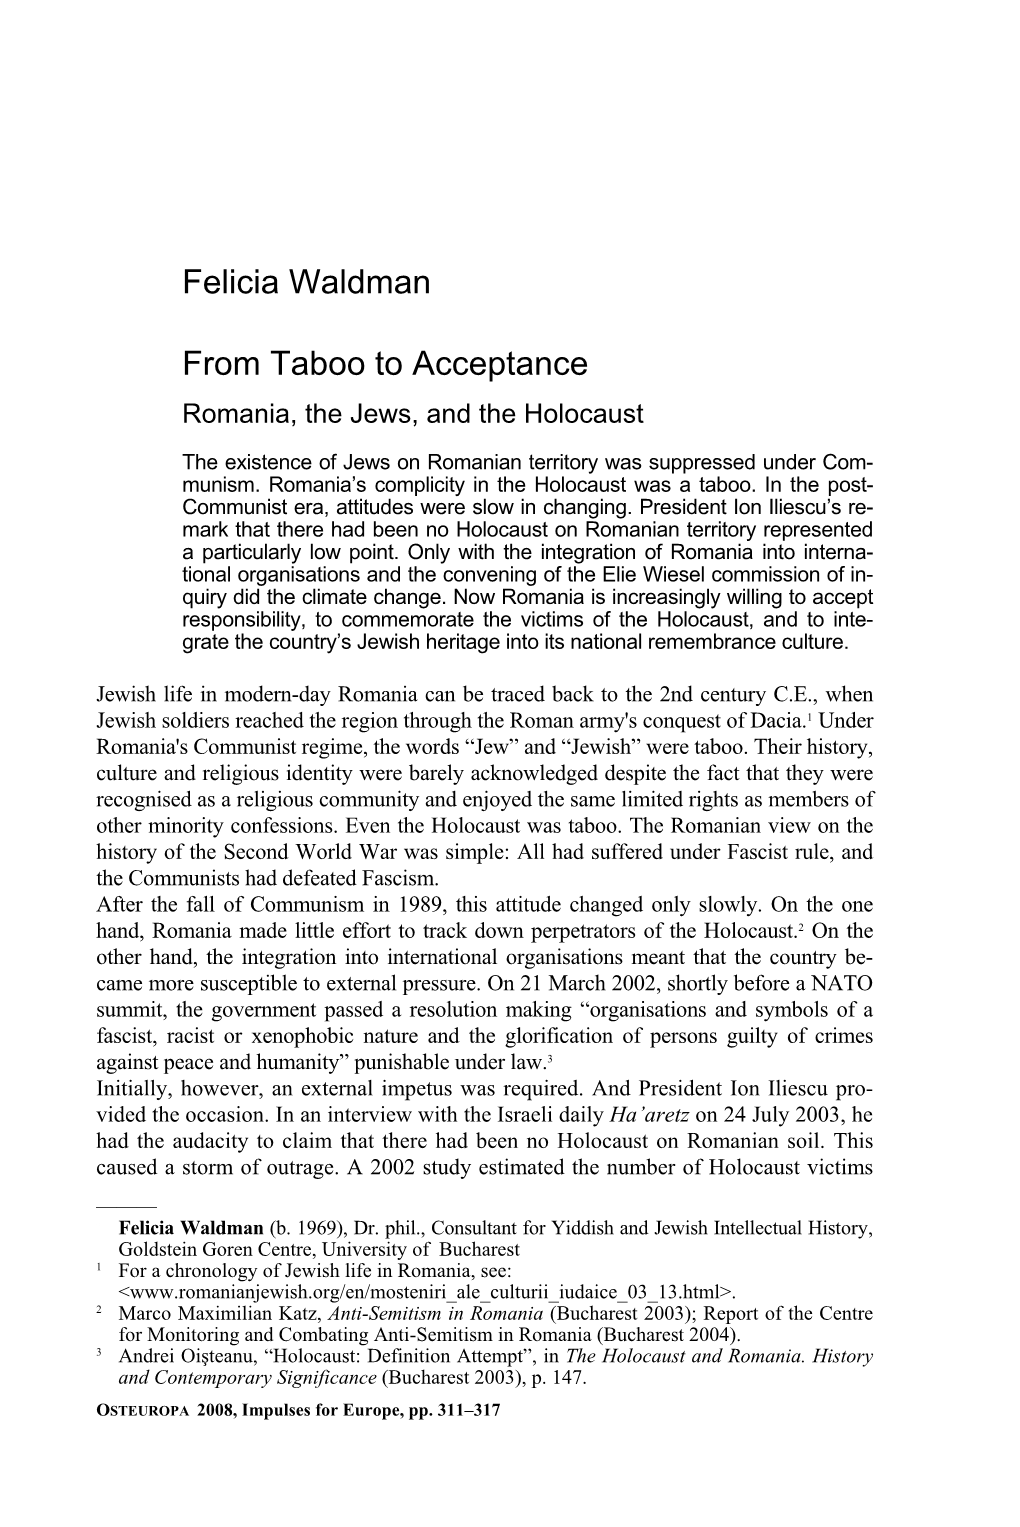 Felicia Waldman• from Taboo to Acceptance